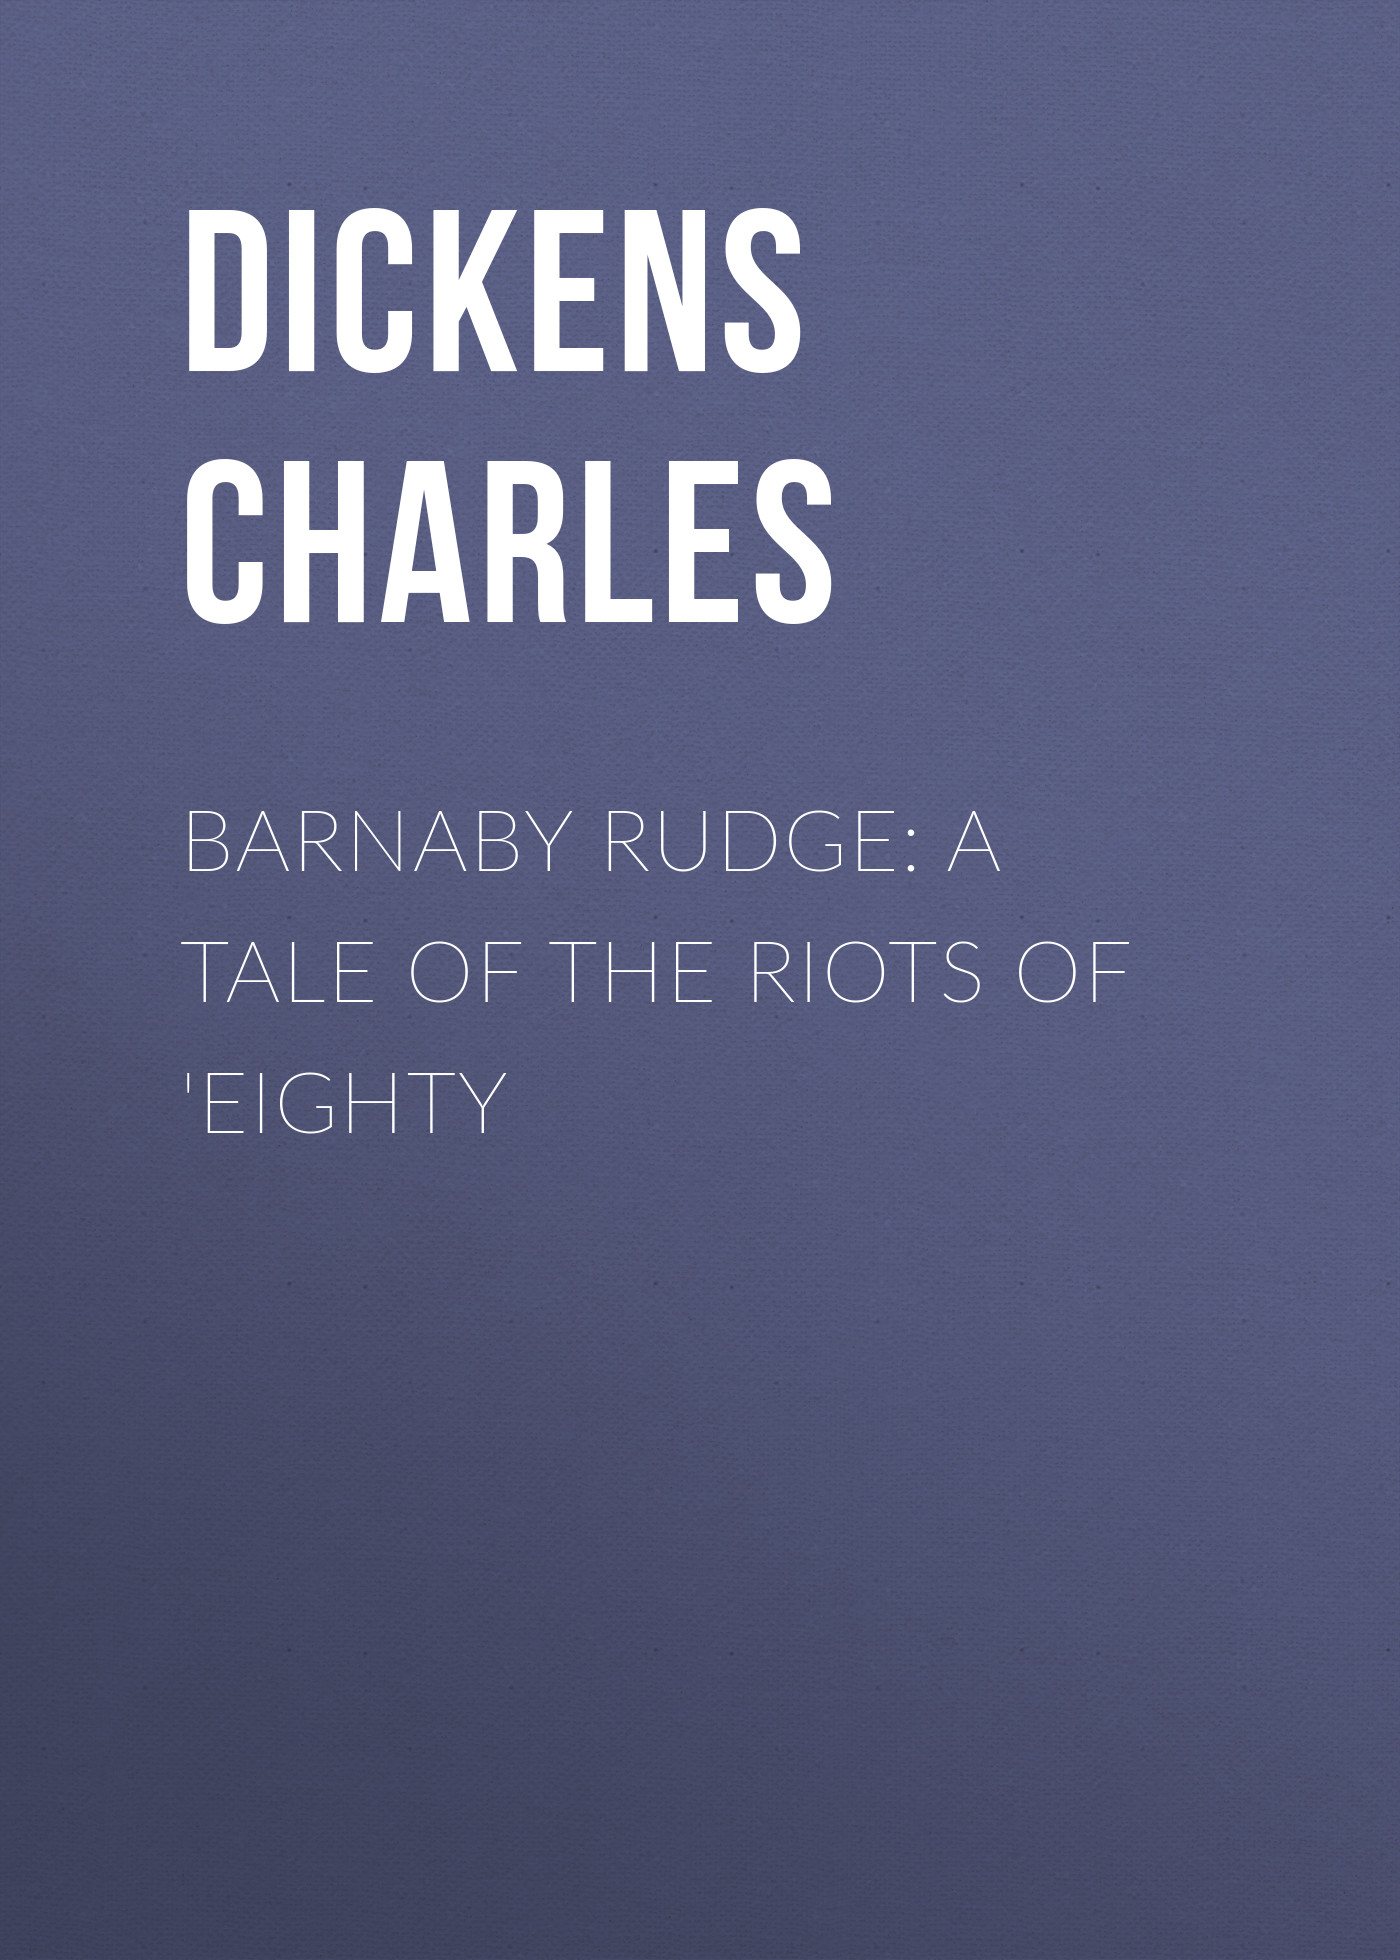 Barnaby Rudge: A Tale of the Riots of'Eighty